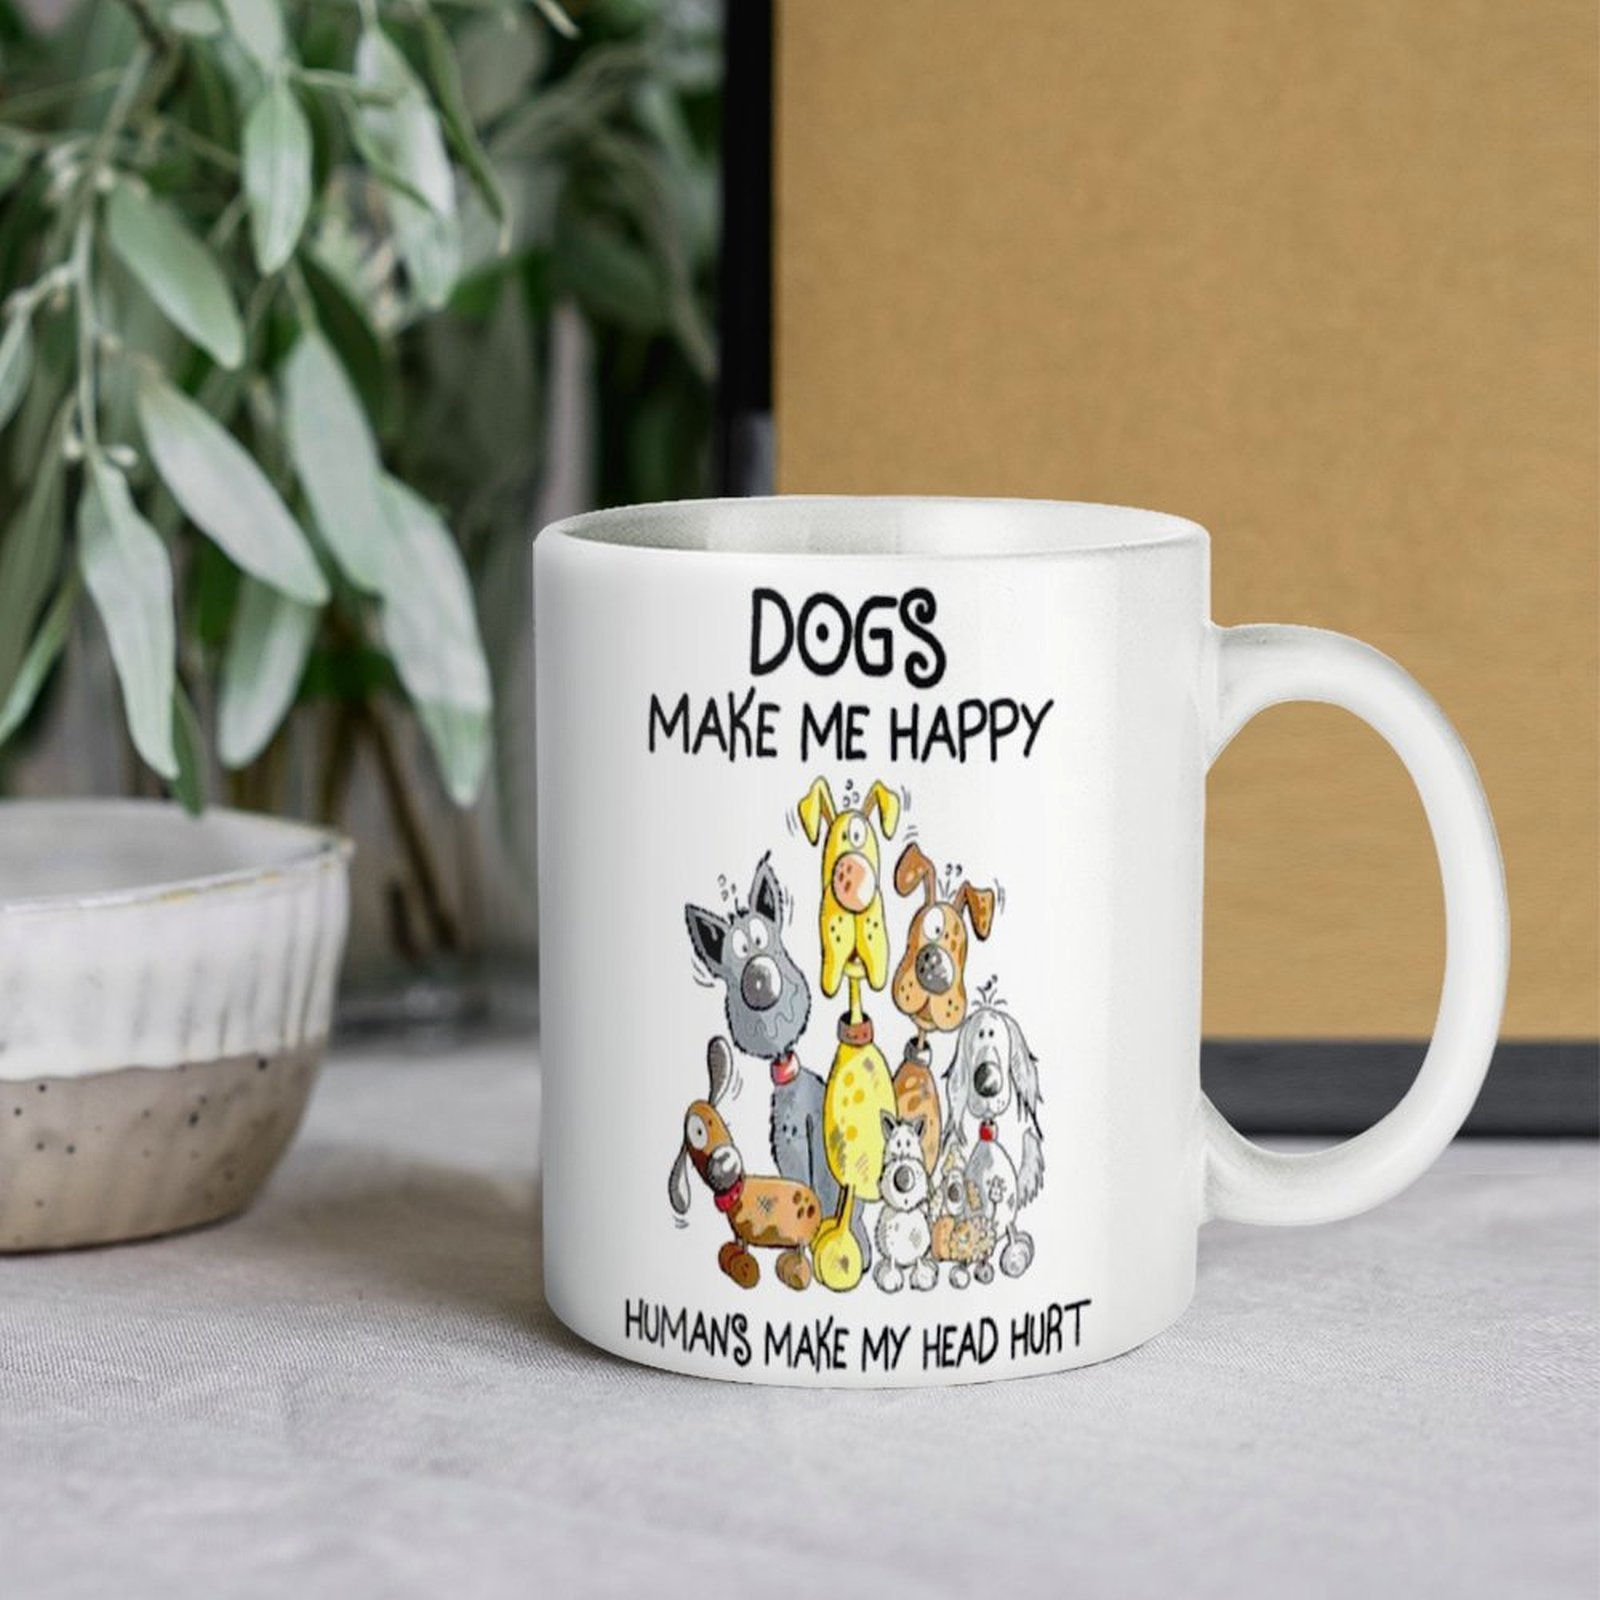 

Dogs Make Me Happy Print Ceramic Coffee Mug, Hand-wash Only Coffee Cup, Multipurpose For Hot And Cold Drinks, Ideal For Office, Home, Party Gift, For Family, Friends, Couples